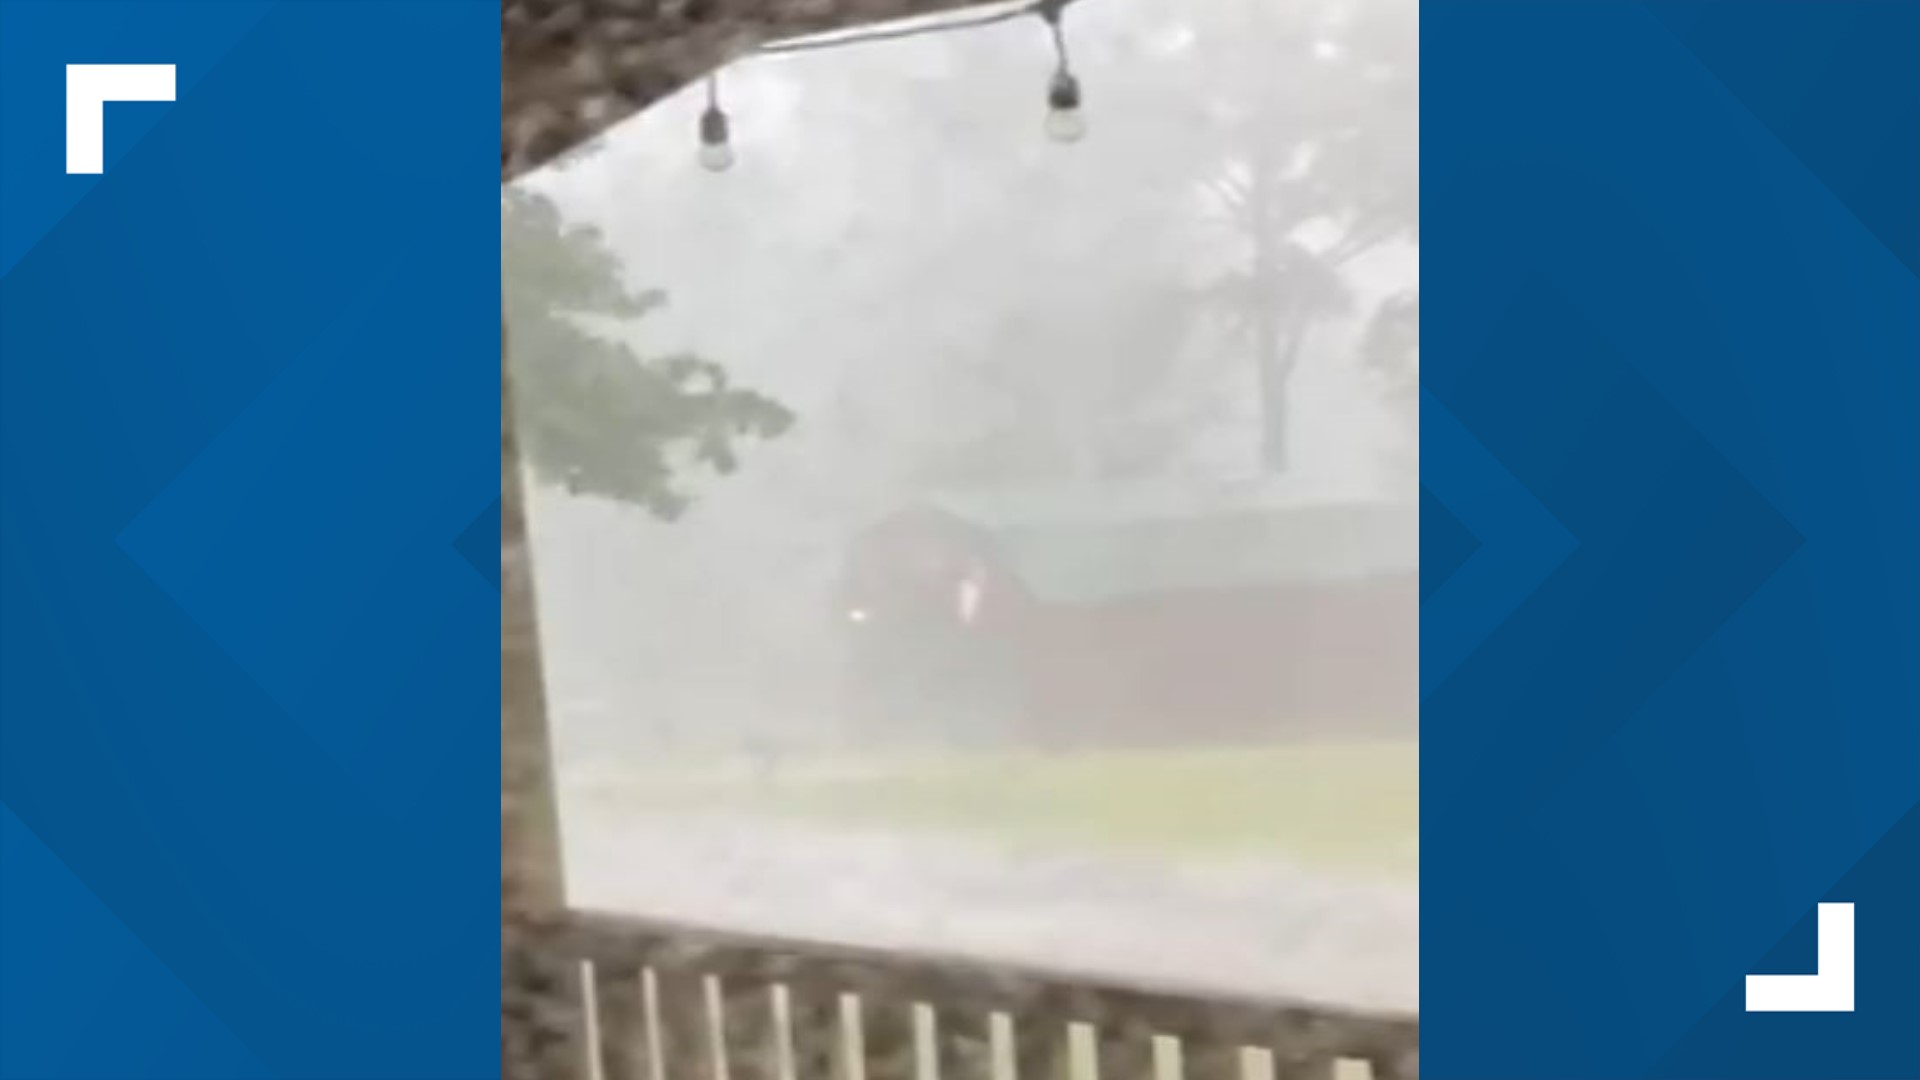 KHOU 11 News viewer Justin Cook sent this video that looked like a tropical storm was blowing through the Wildwood Shores area of Huntsville.